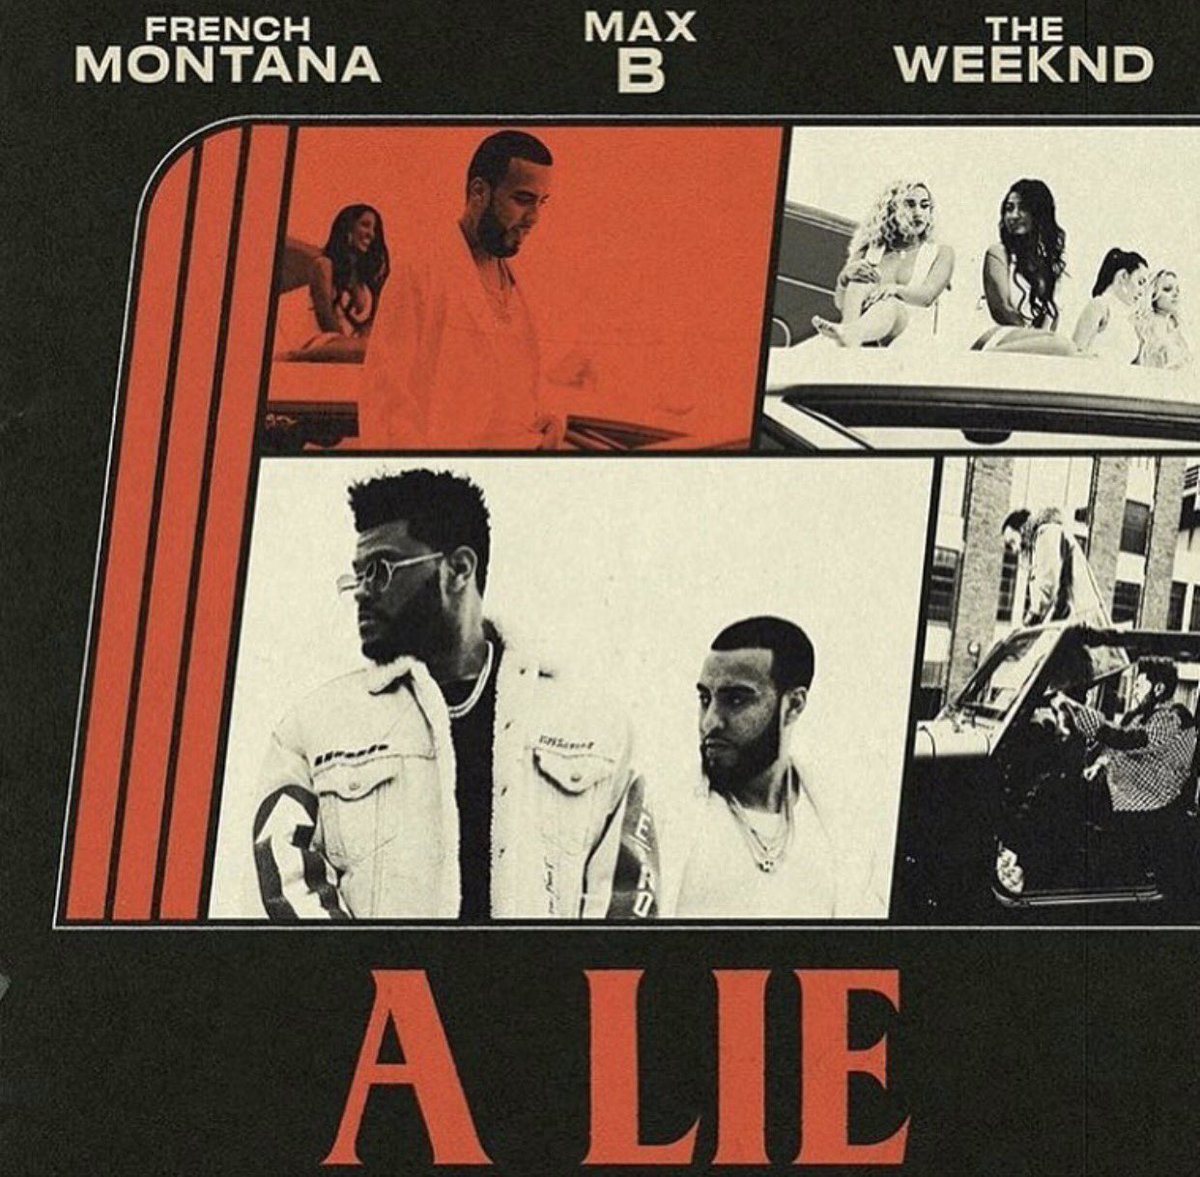 HIT AFTER HIT AFTER HIT!!! THIS FRIDAY!! @frenchmontana @theweeknd #JUNGLERULES ???????????? https://t.co/ZUZ51SnTty